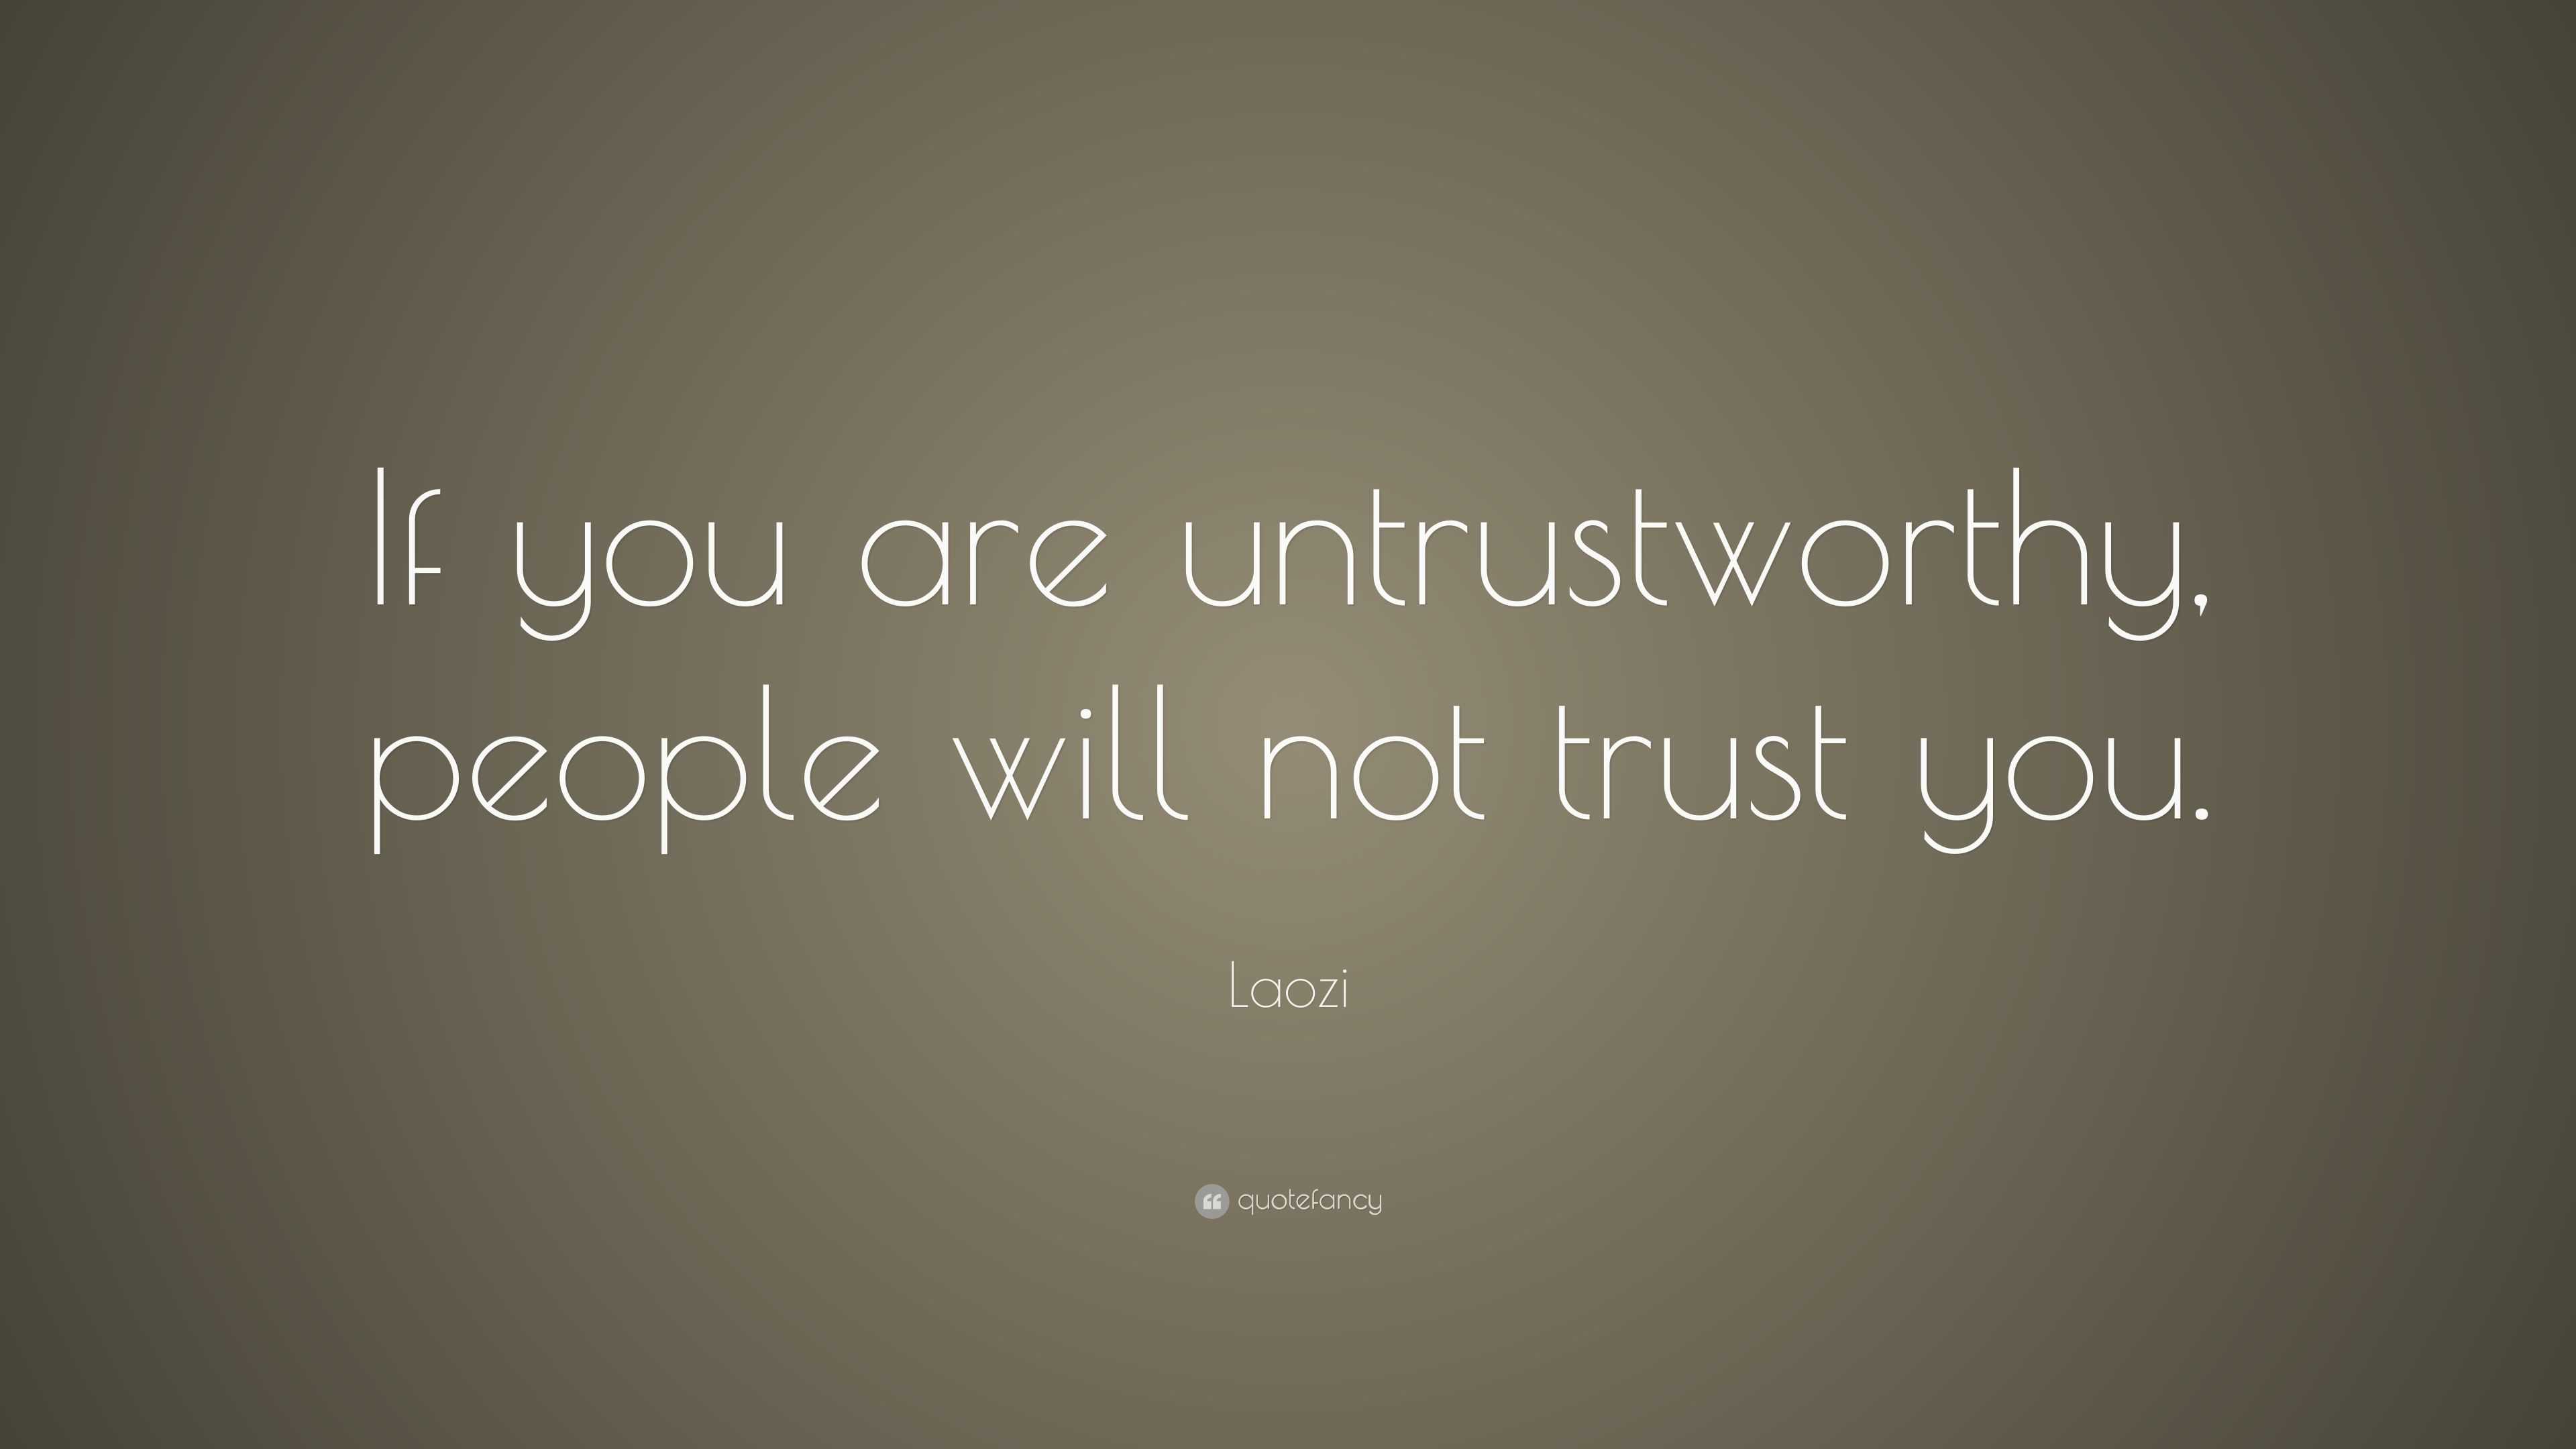 Laozi Quote: “If you are untrustworthy, people will not trust you.” (10 ...